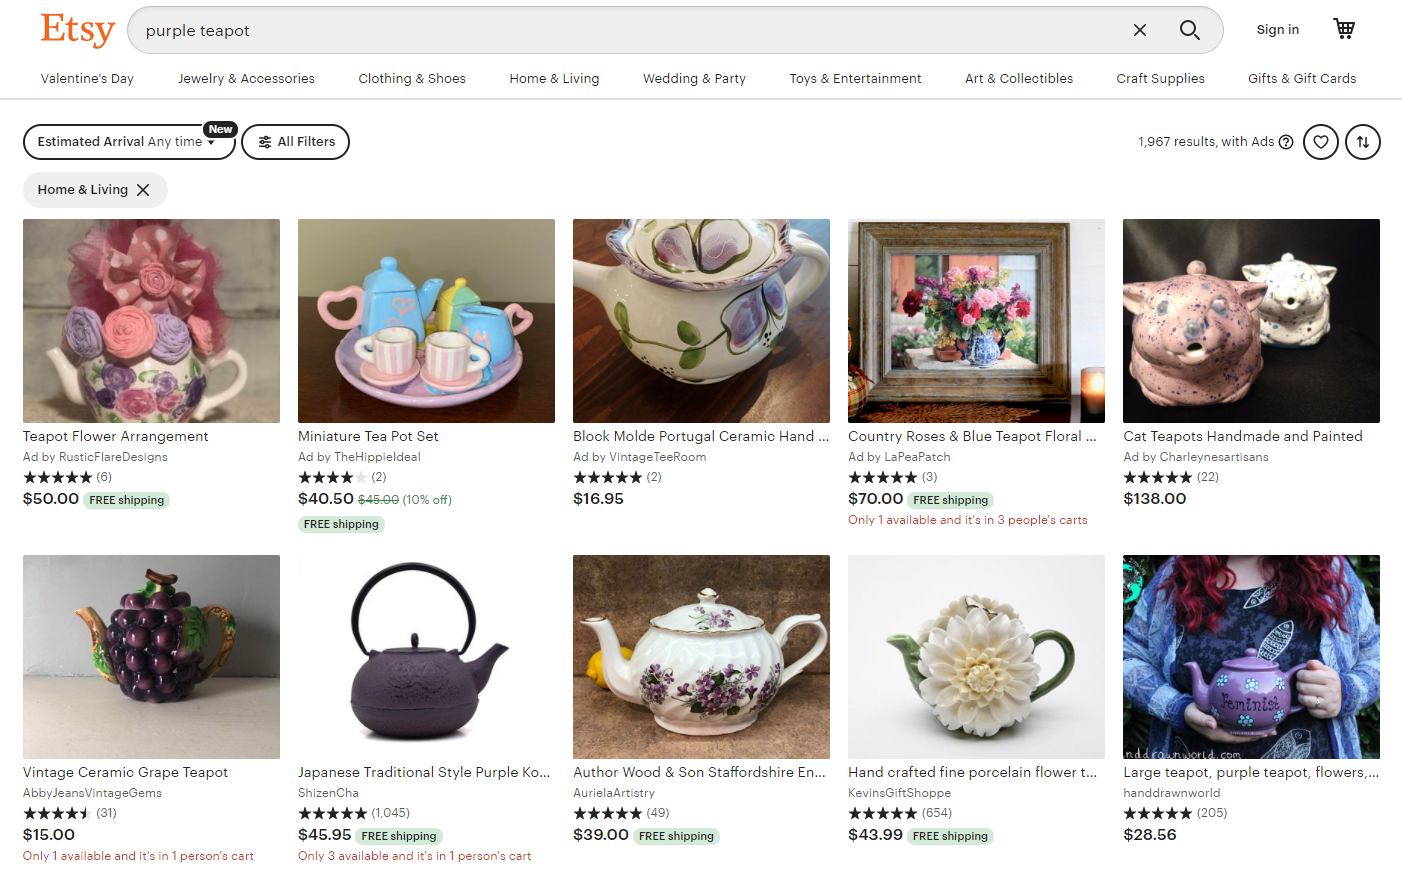 Multichannel selling on the Etsy marketplace